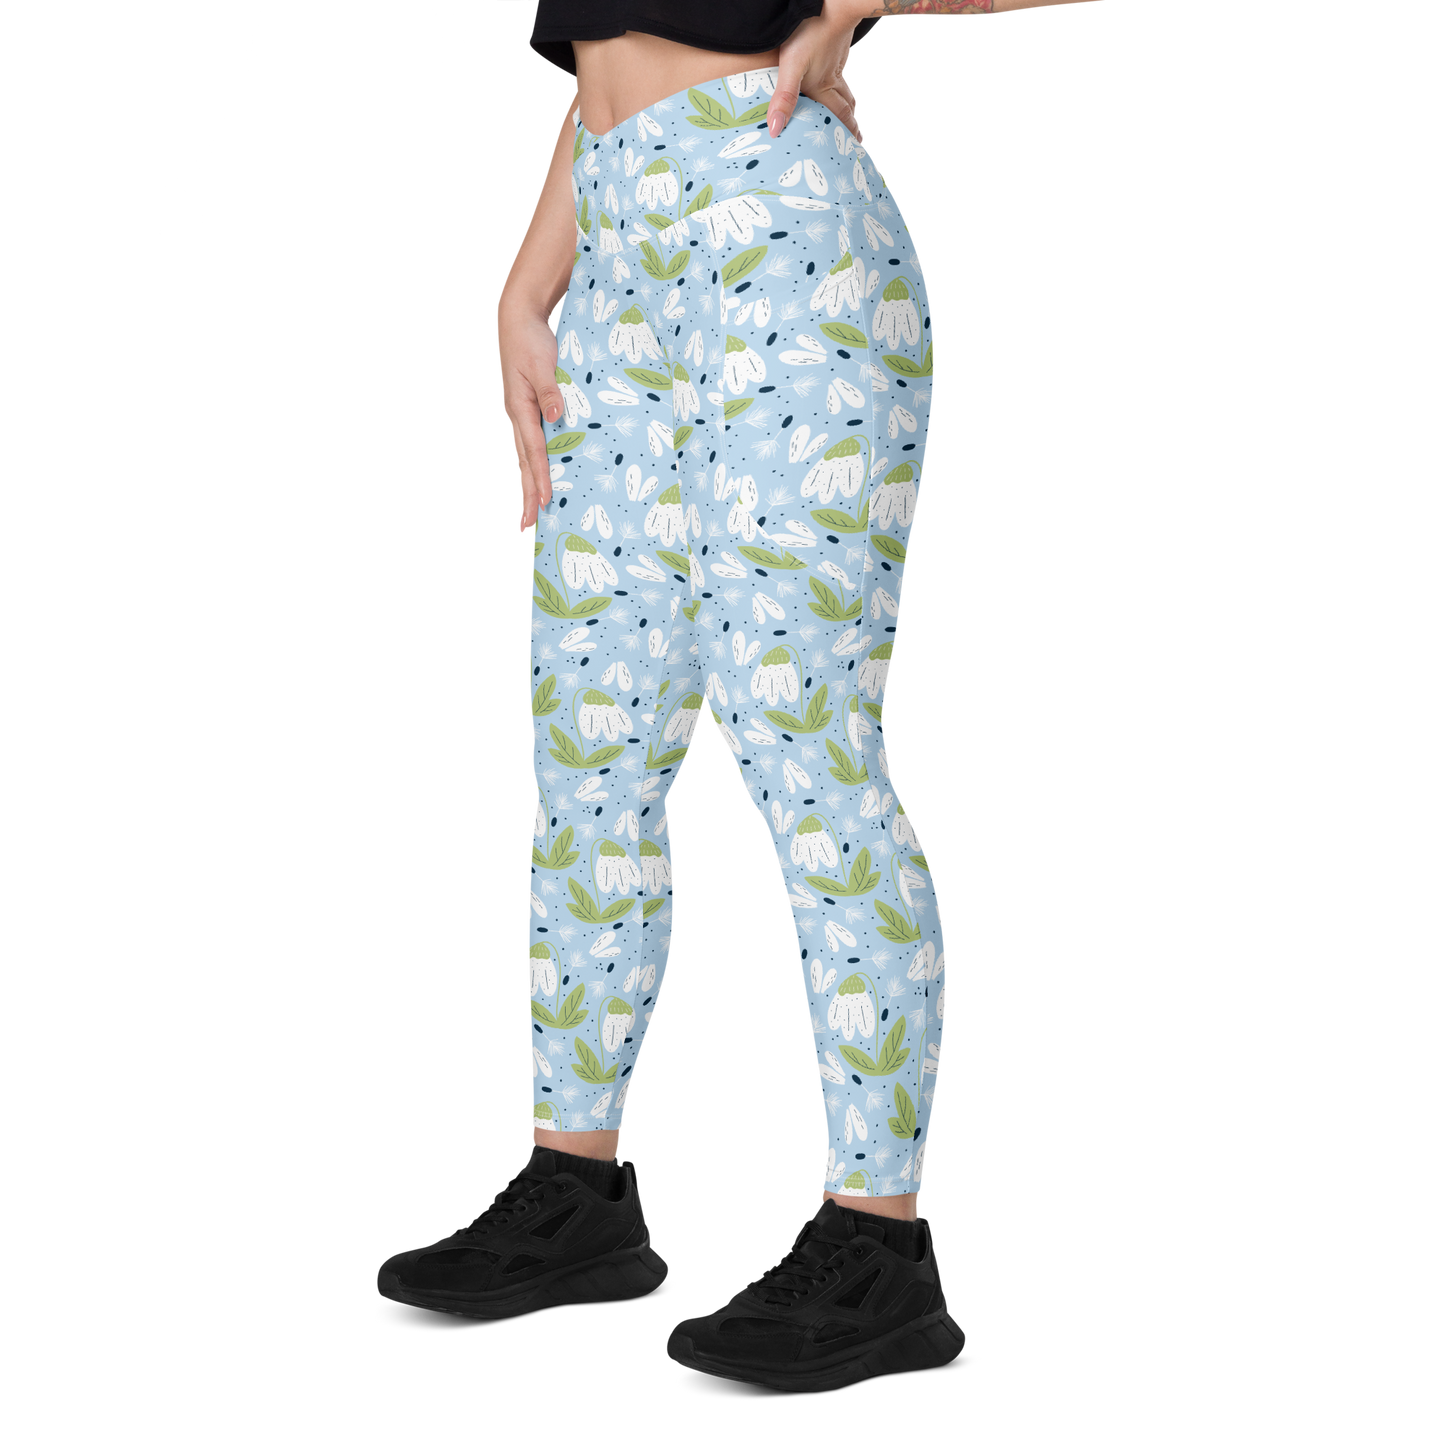 Scandinavian Spring Floral | Seamless Patterns | All-Over Print Crossover Leggings with Pockets - #3